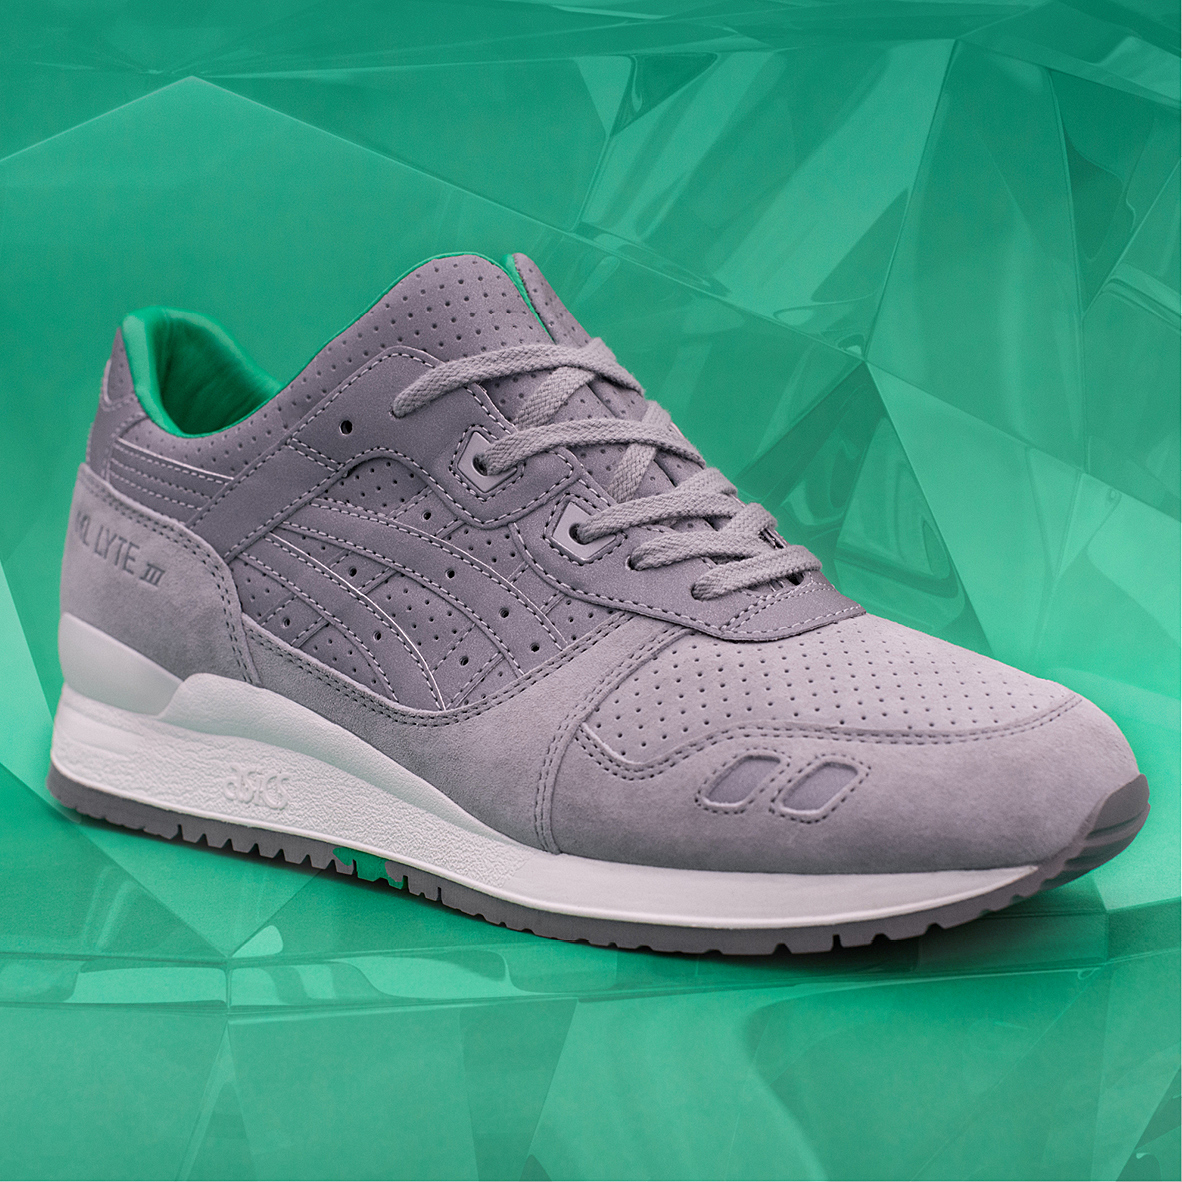 gel lyte iii sizing Sale,up to 47 